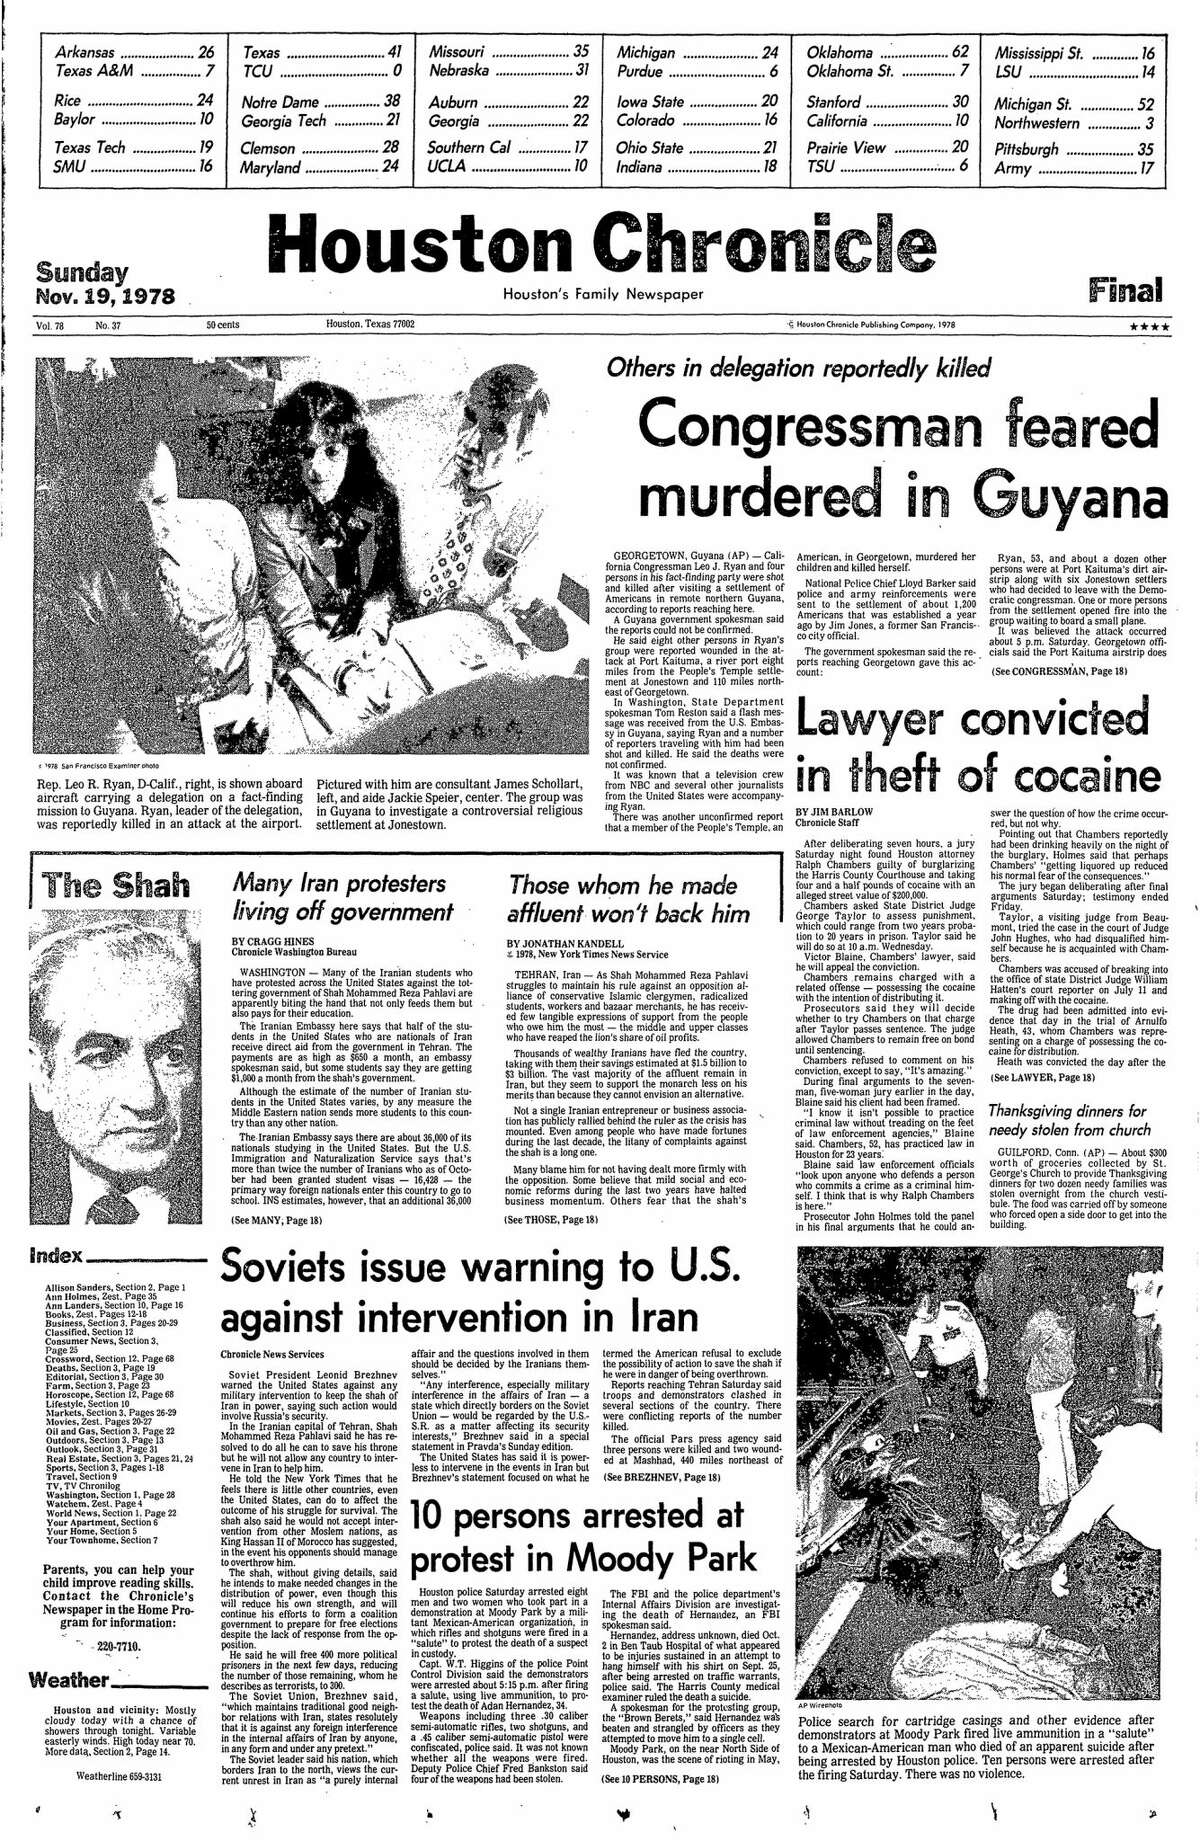 Houston Chronicle front page from Nov. 19, 1978.